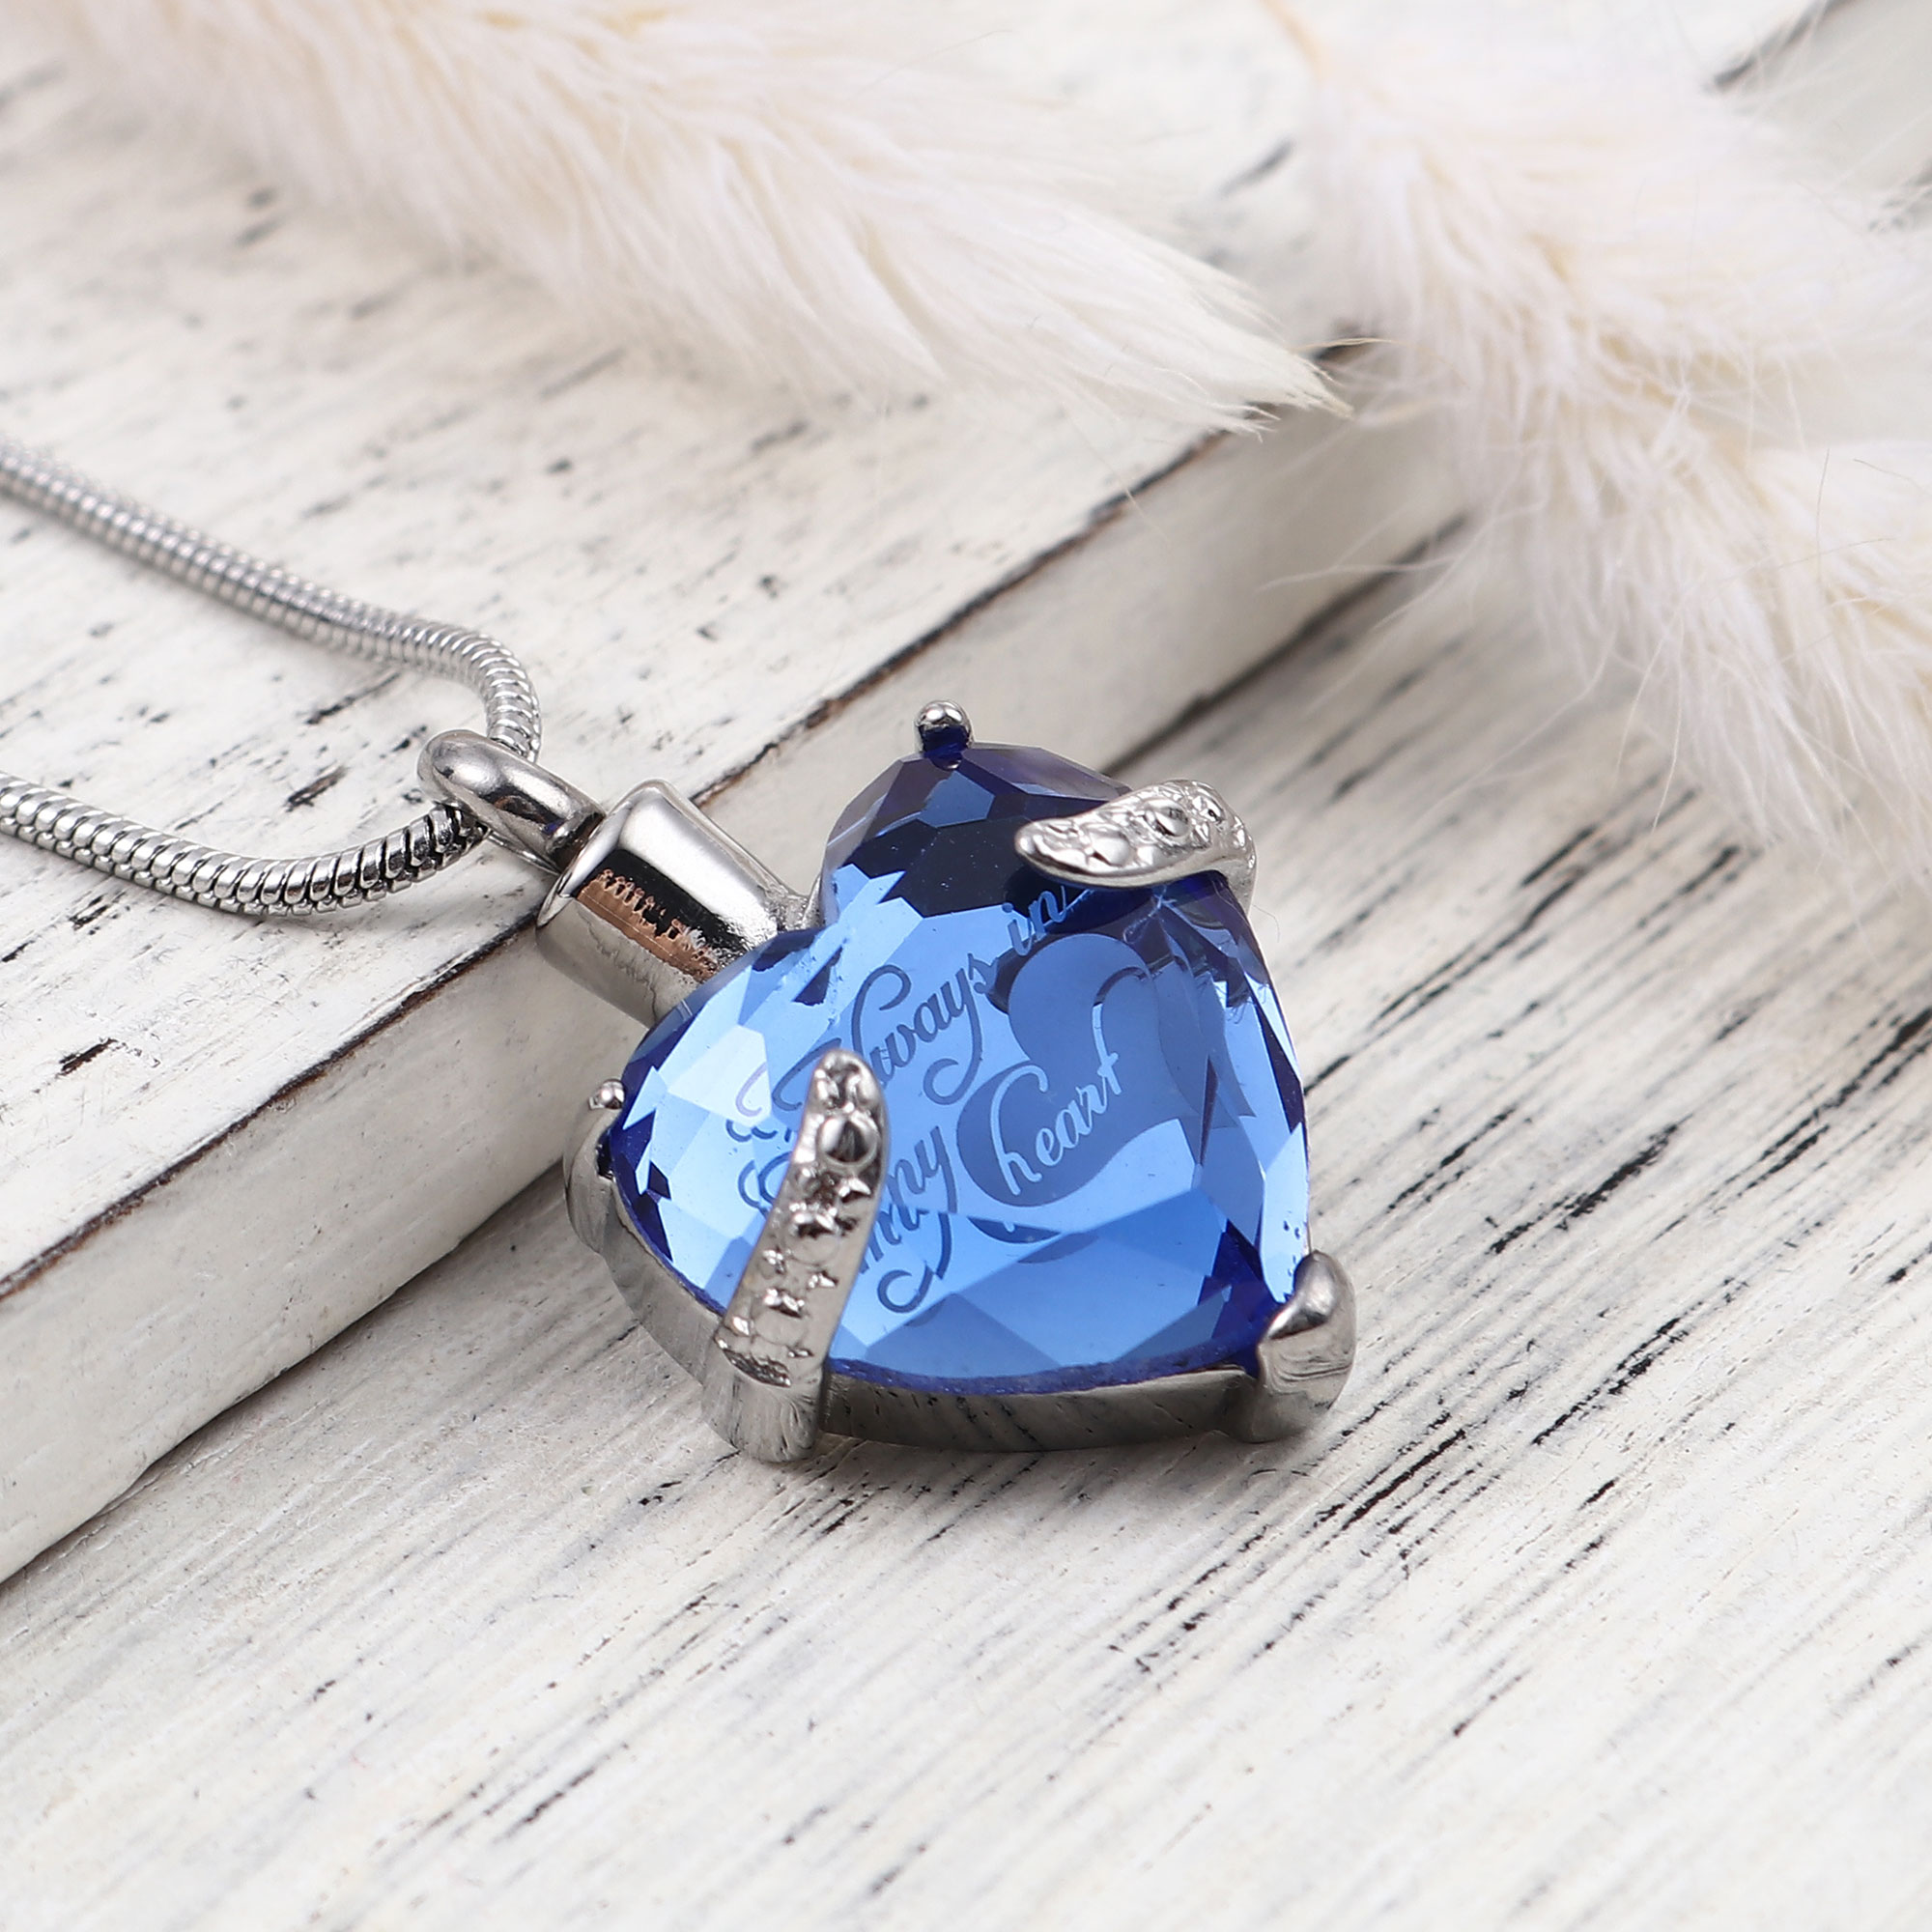 Blue "Always in My Heart" Cremation Necklace Rhinsestone Women's Heart Urn Necklace for Ashes Funeral Urn Jewelry Remembrance Memorial Pendant with Free Funnel Fill Kit and Gift Box - image 3 of 10